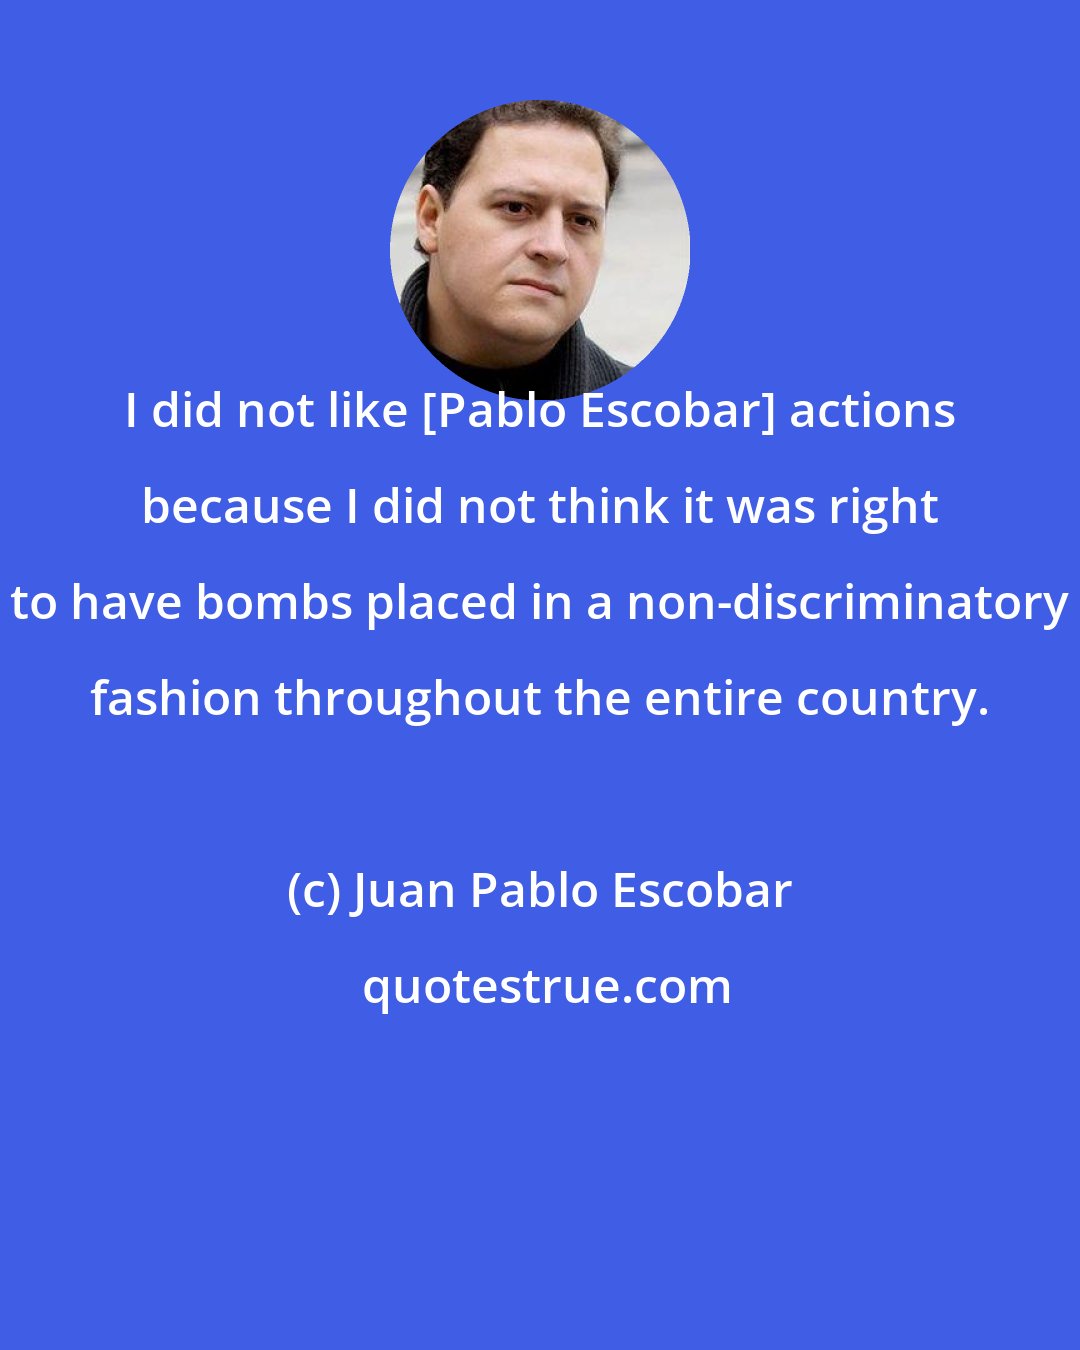 Juan Pablo Escobar: I did not like [Pablo Escobar] actions because I did not think it was right to have bombs placed in a non-discriminatory fashion throughout the entire country.